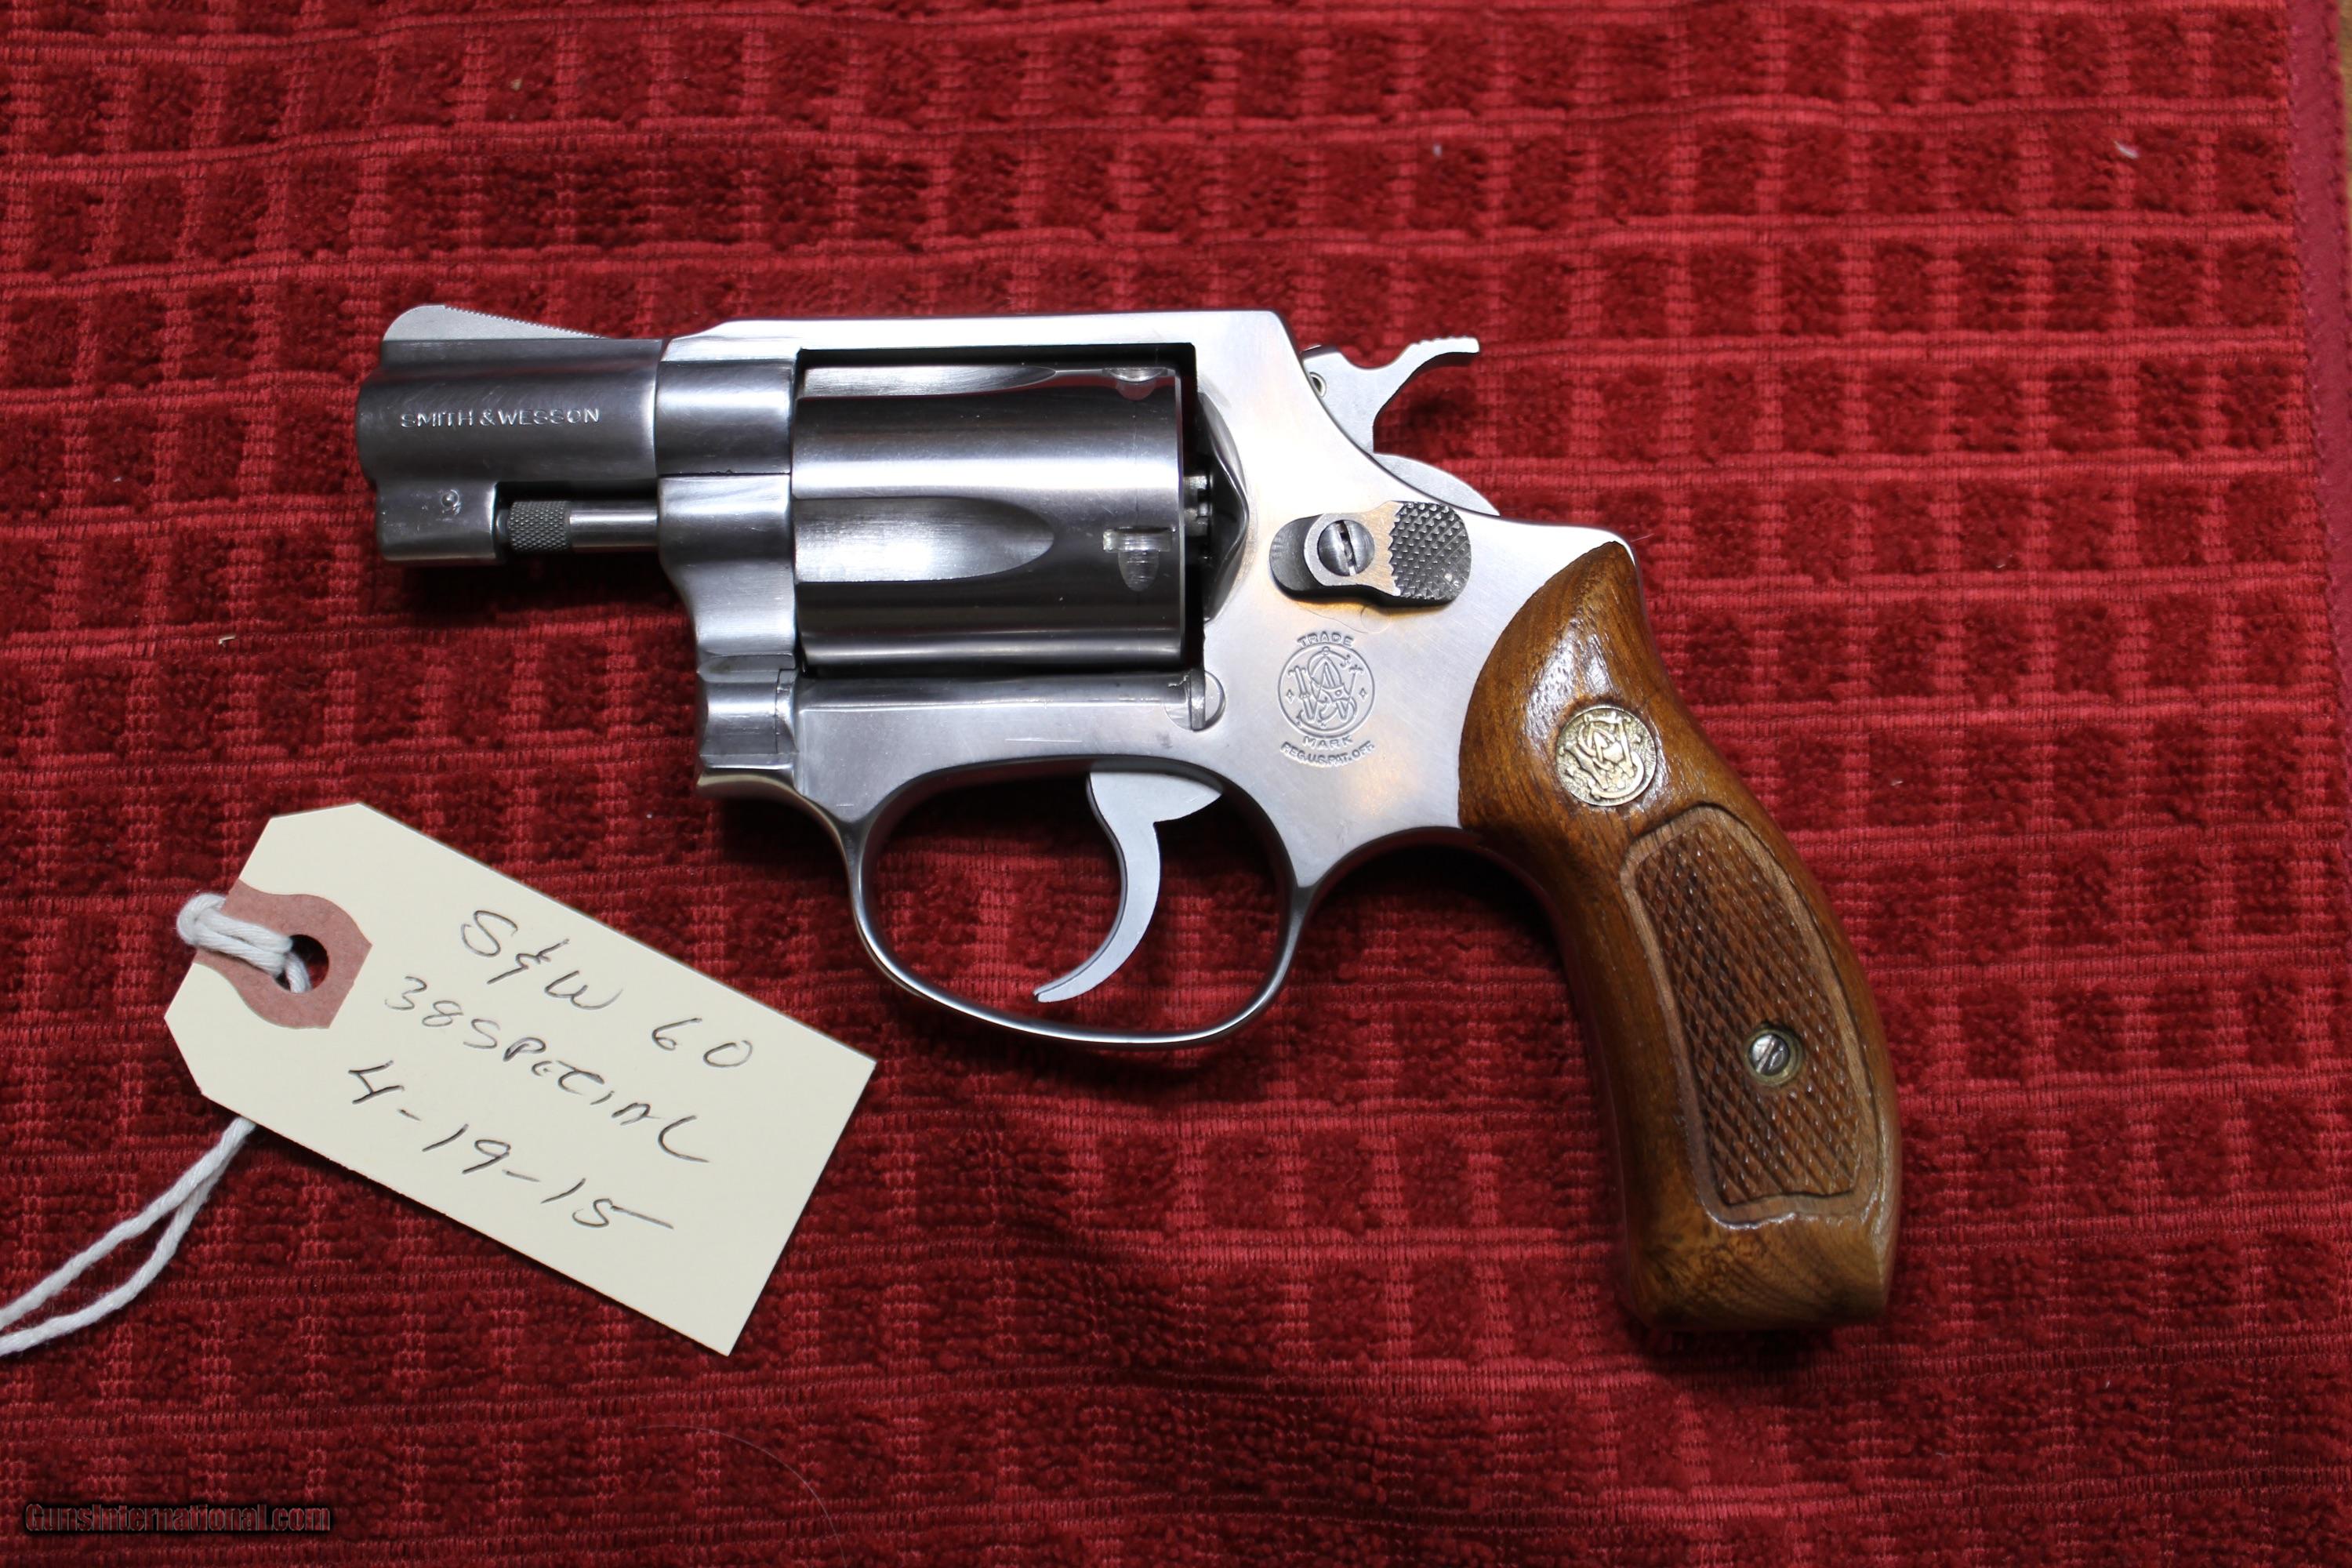 Smith And Wesson Sandw Stainless Steel 5 Shot Model 60 38 Special Revolver Images And Photos